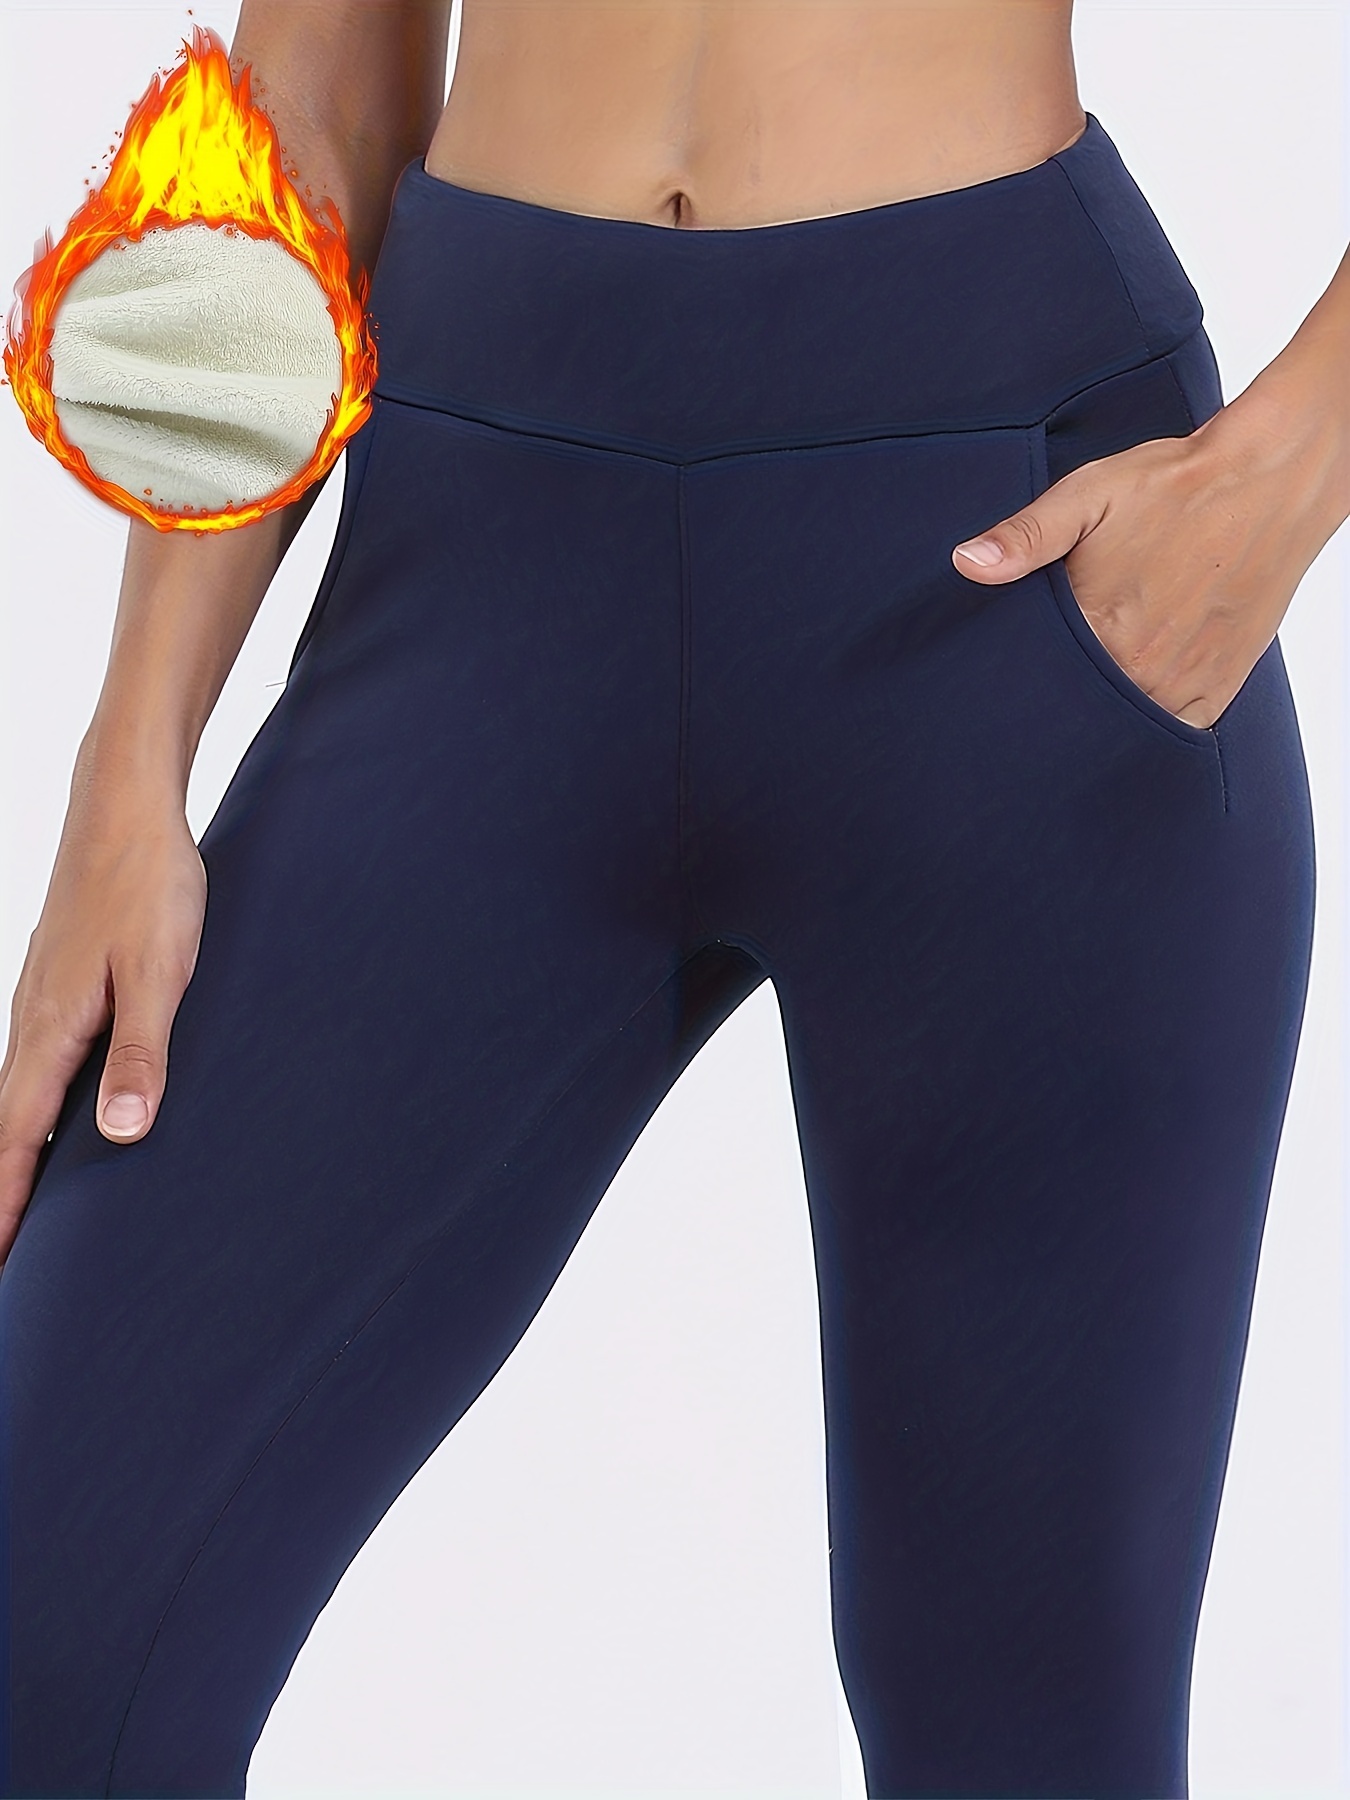 Women's Black Thermal Yoga Pants with Slimming Side Pockets - Stretchy and  Comfortable Activewear for Running and Fitness